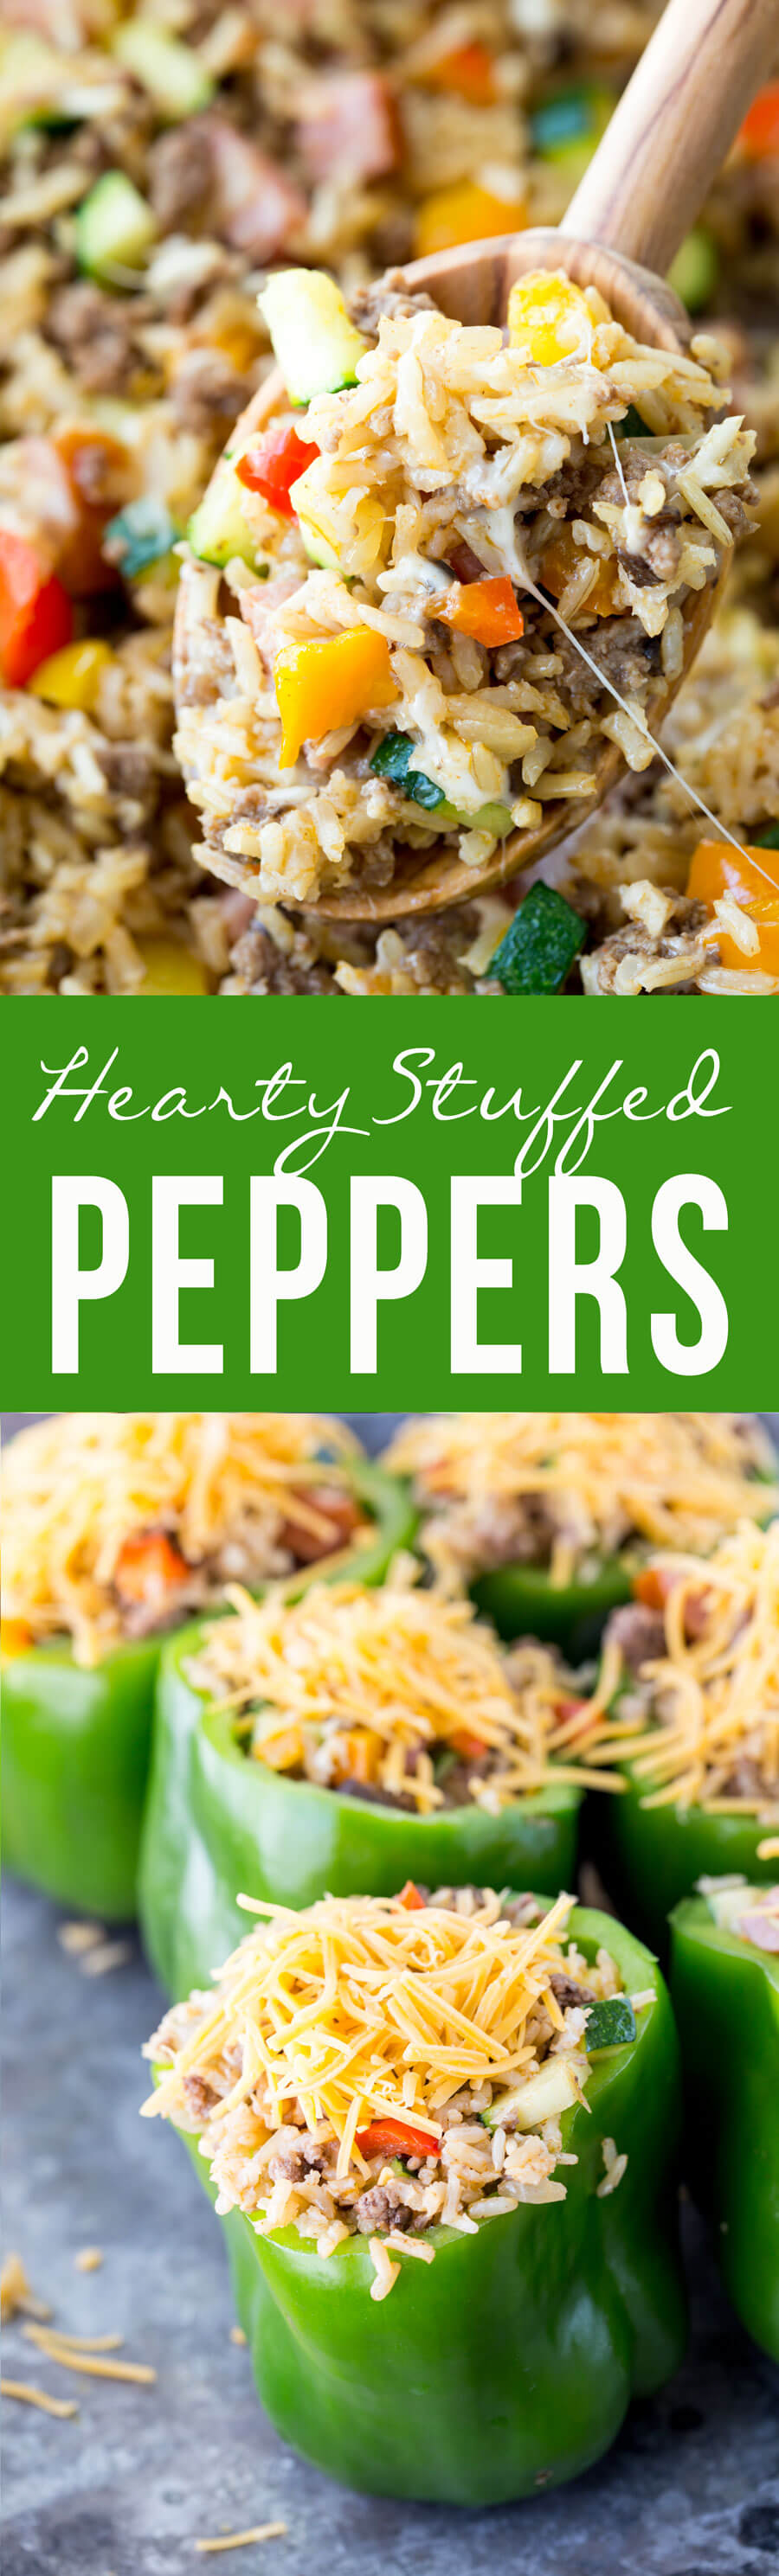 Hearty Stuffed Peppers Recipe - Easy Peasy Meals